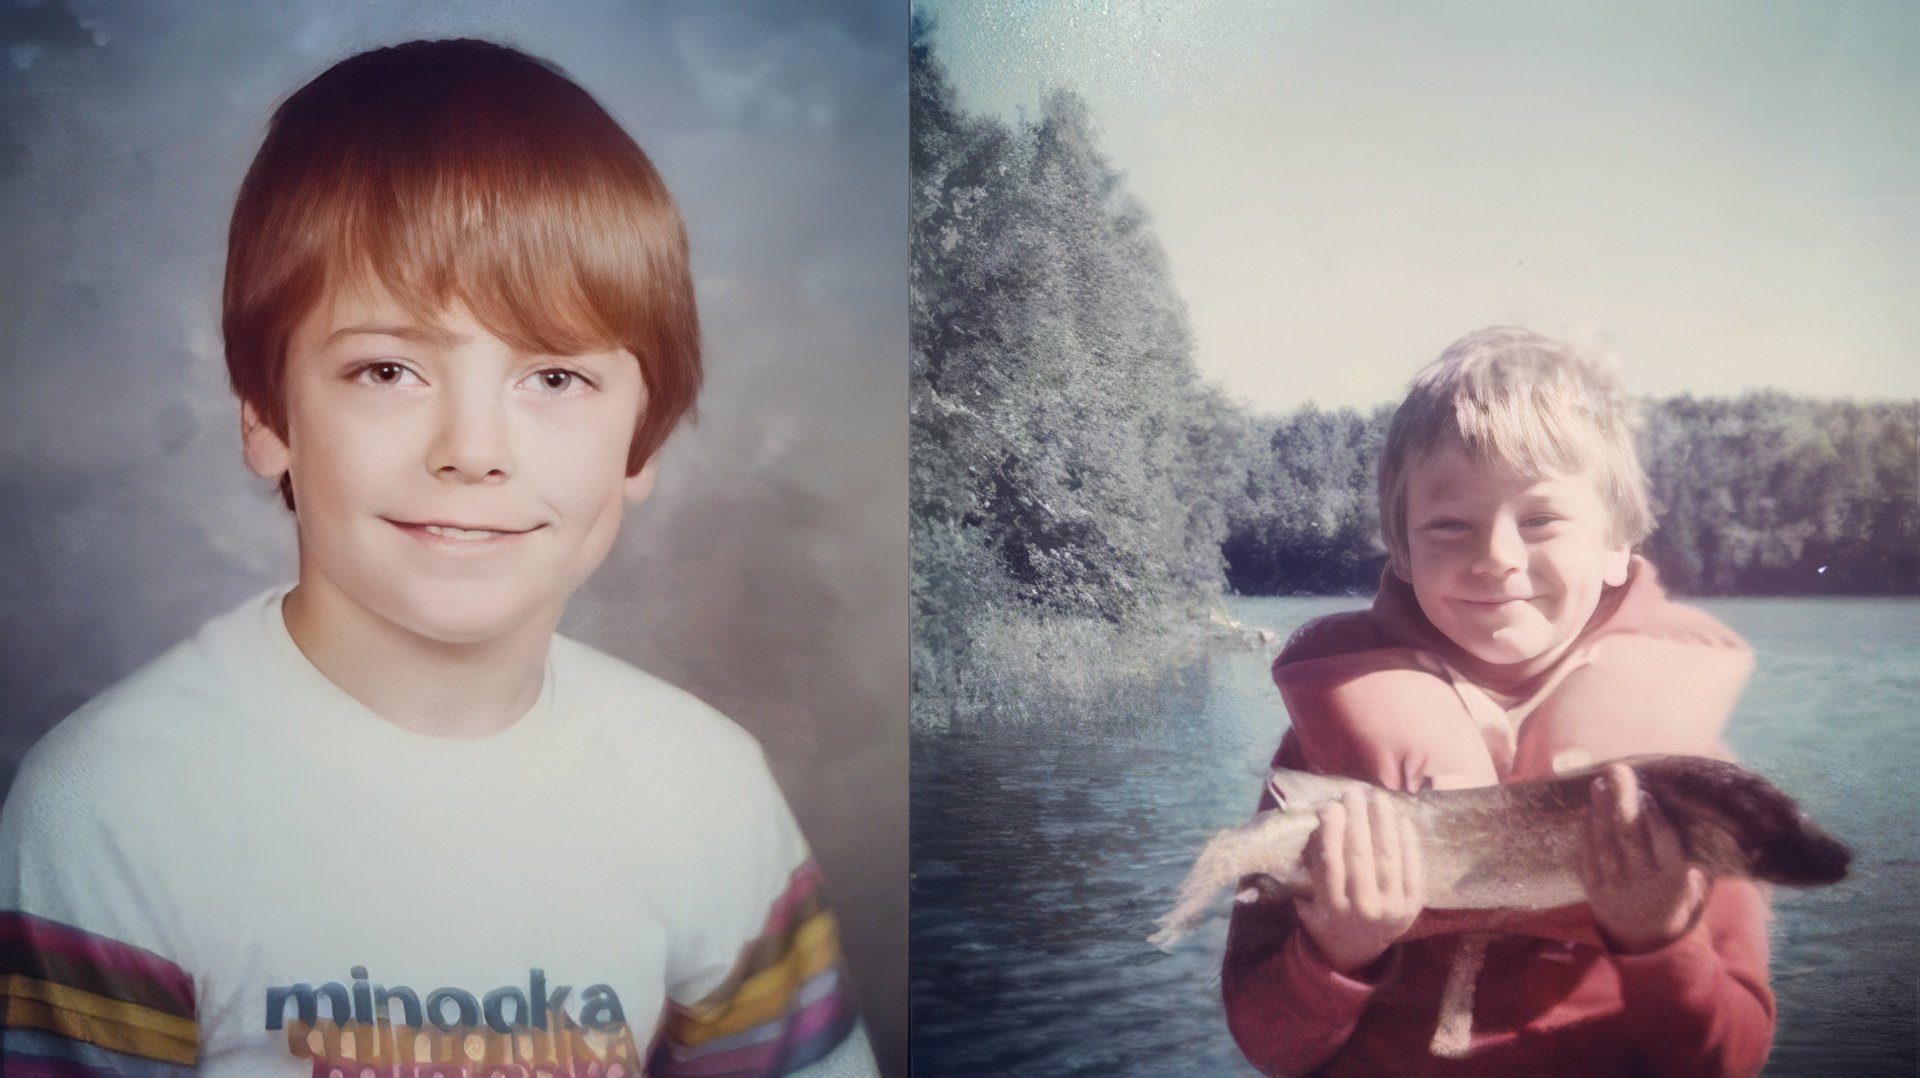 Nick Offerman as a child